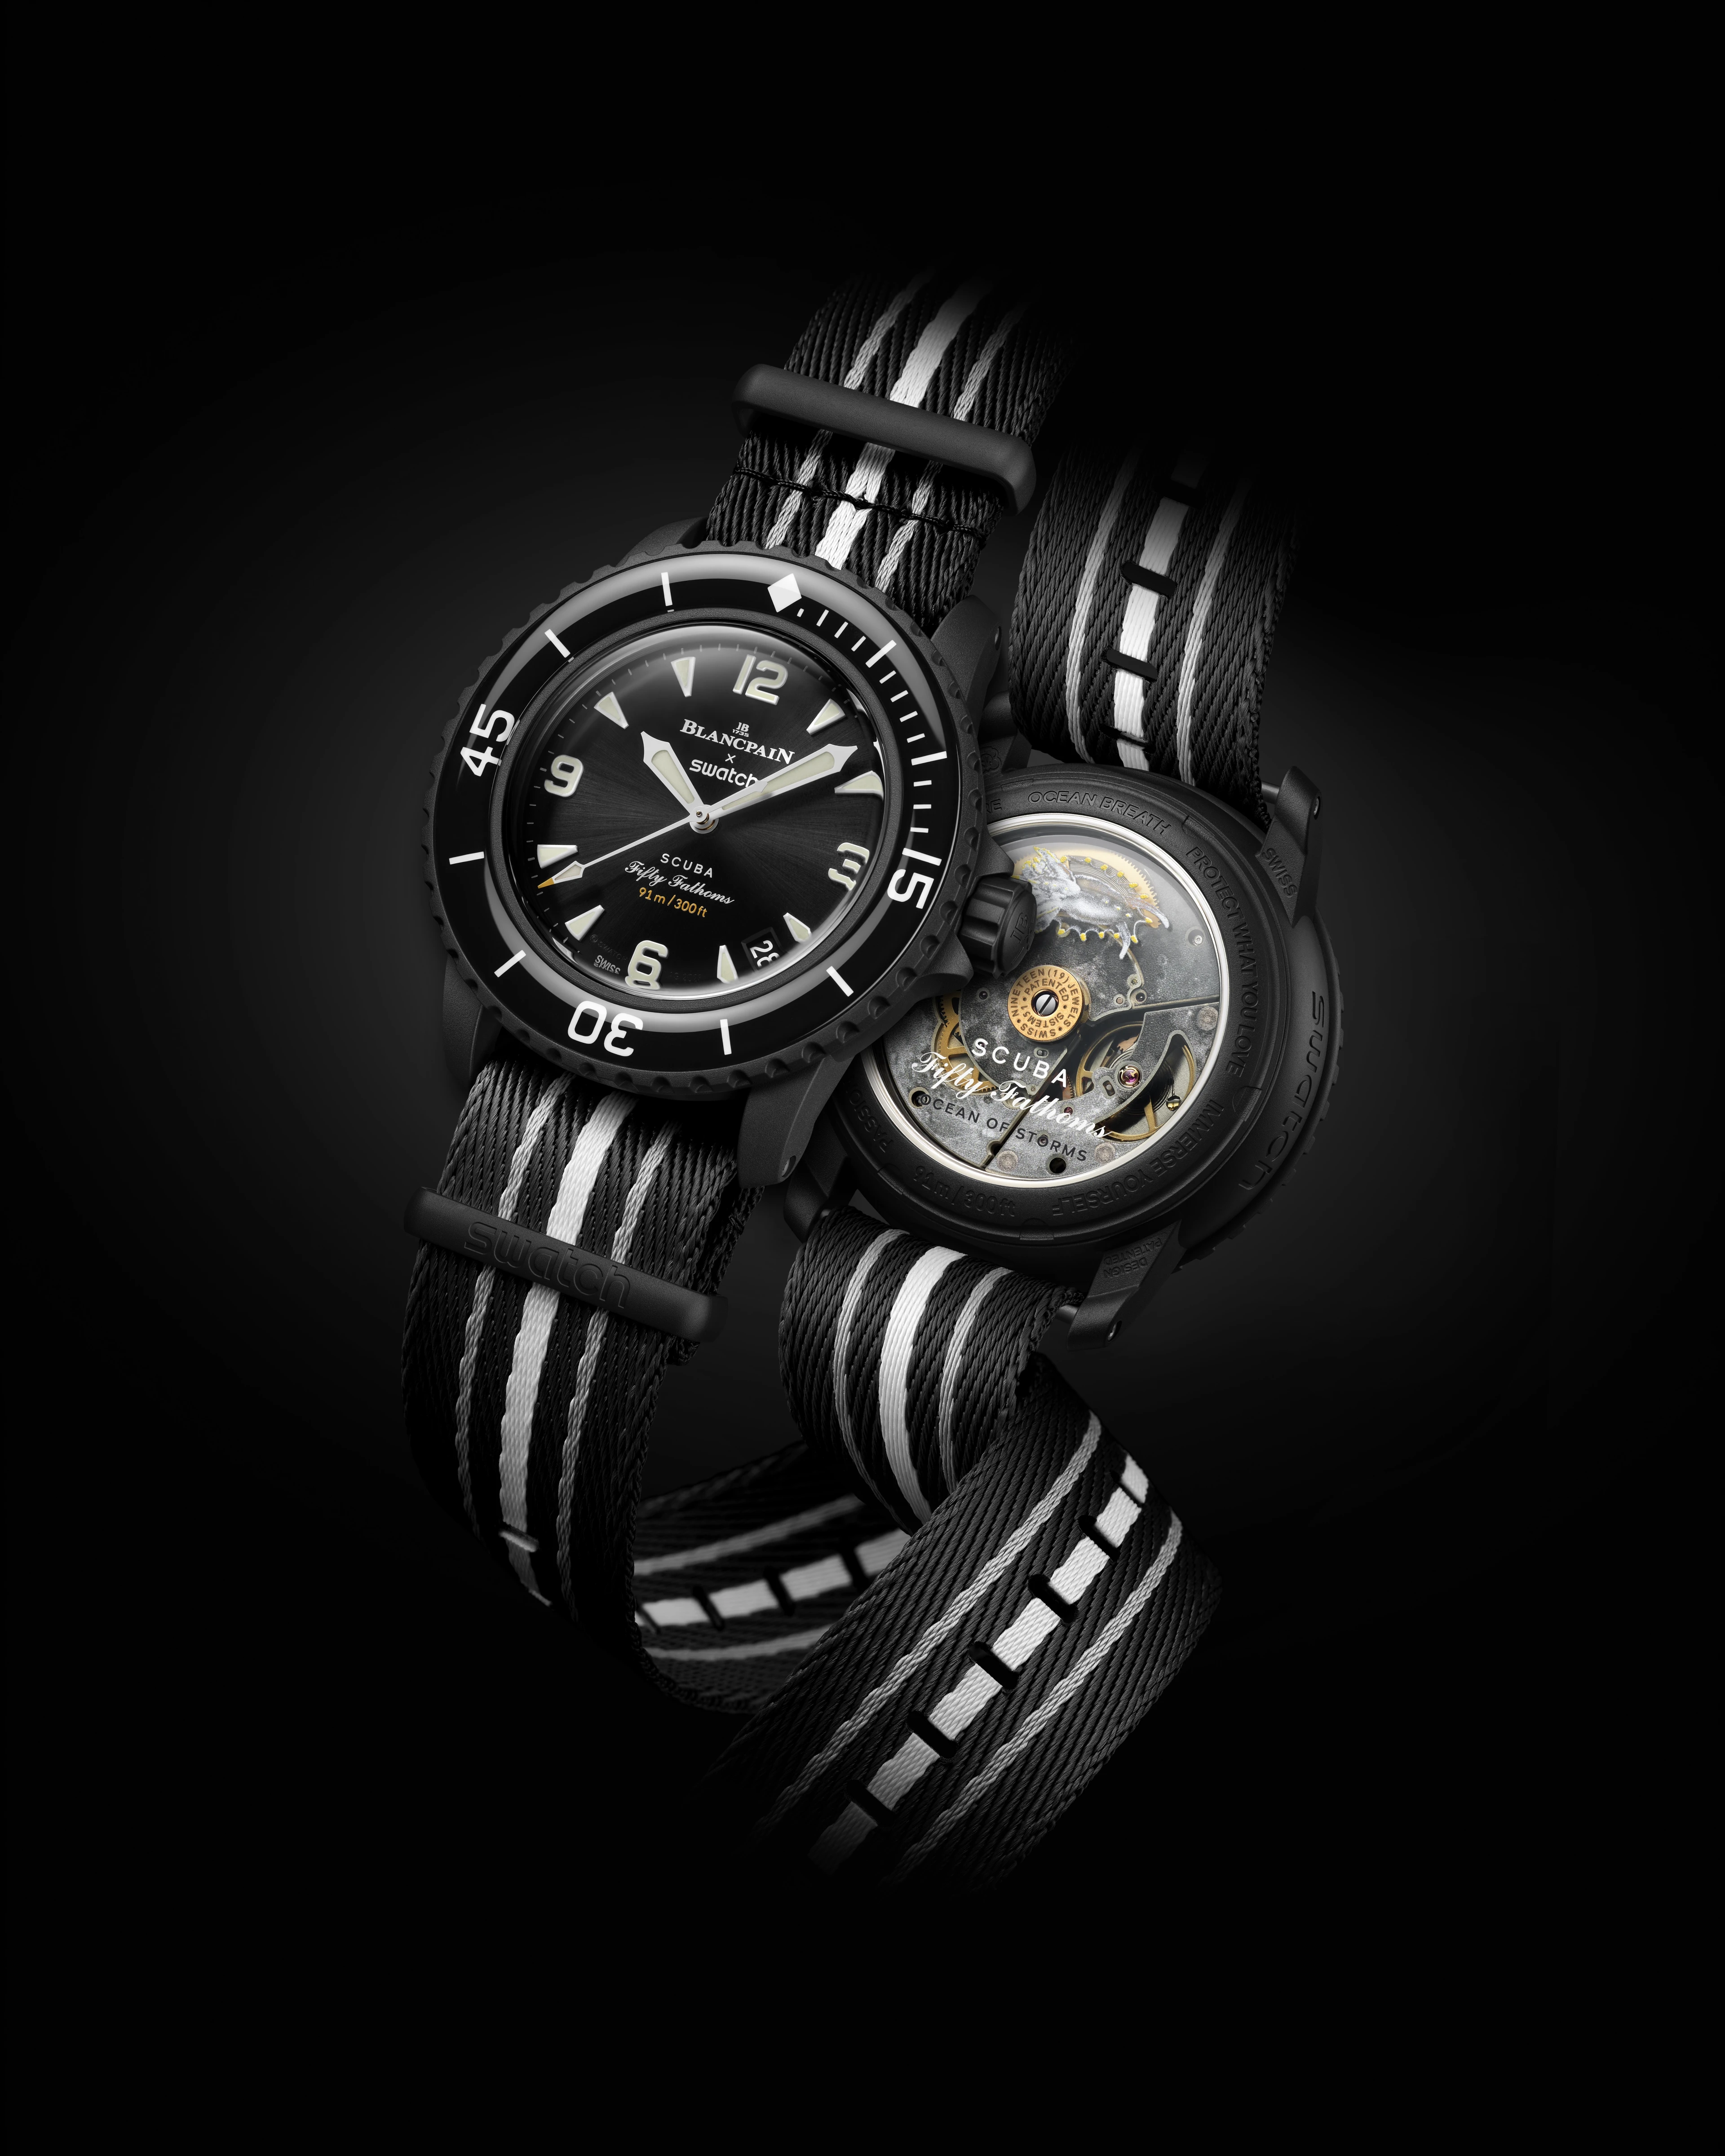 Blancpain X Swatch Bioceramic Scuba Fifty Fathoms discovers a sixth ocean, Ocean of Storms